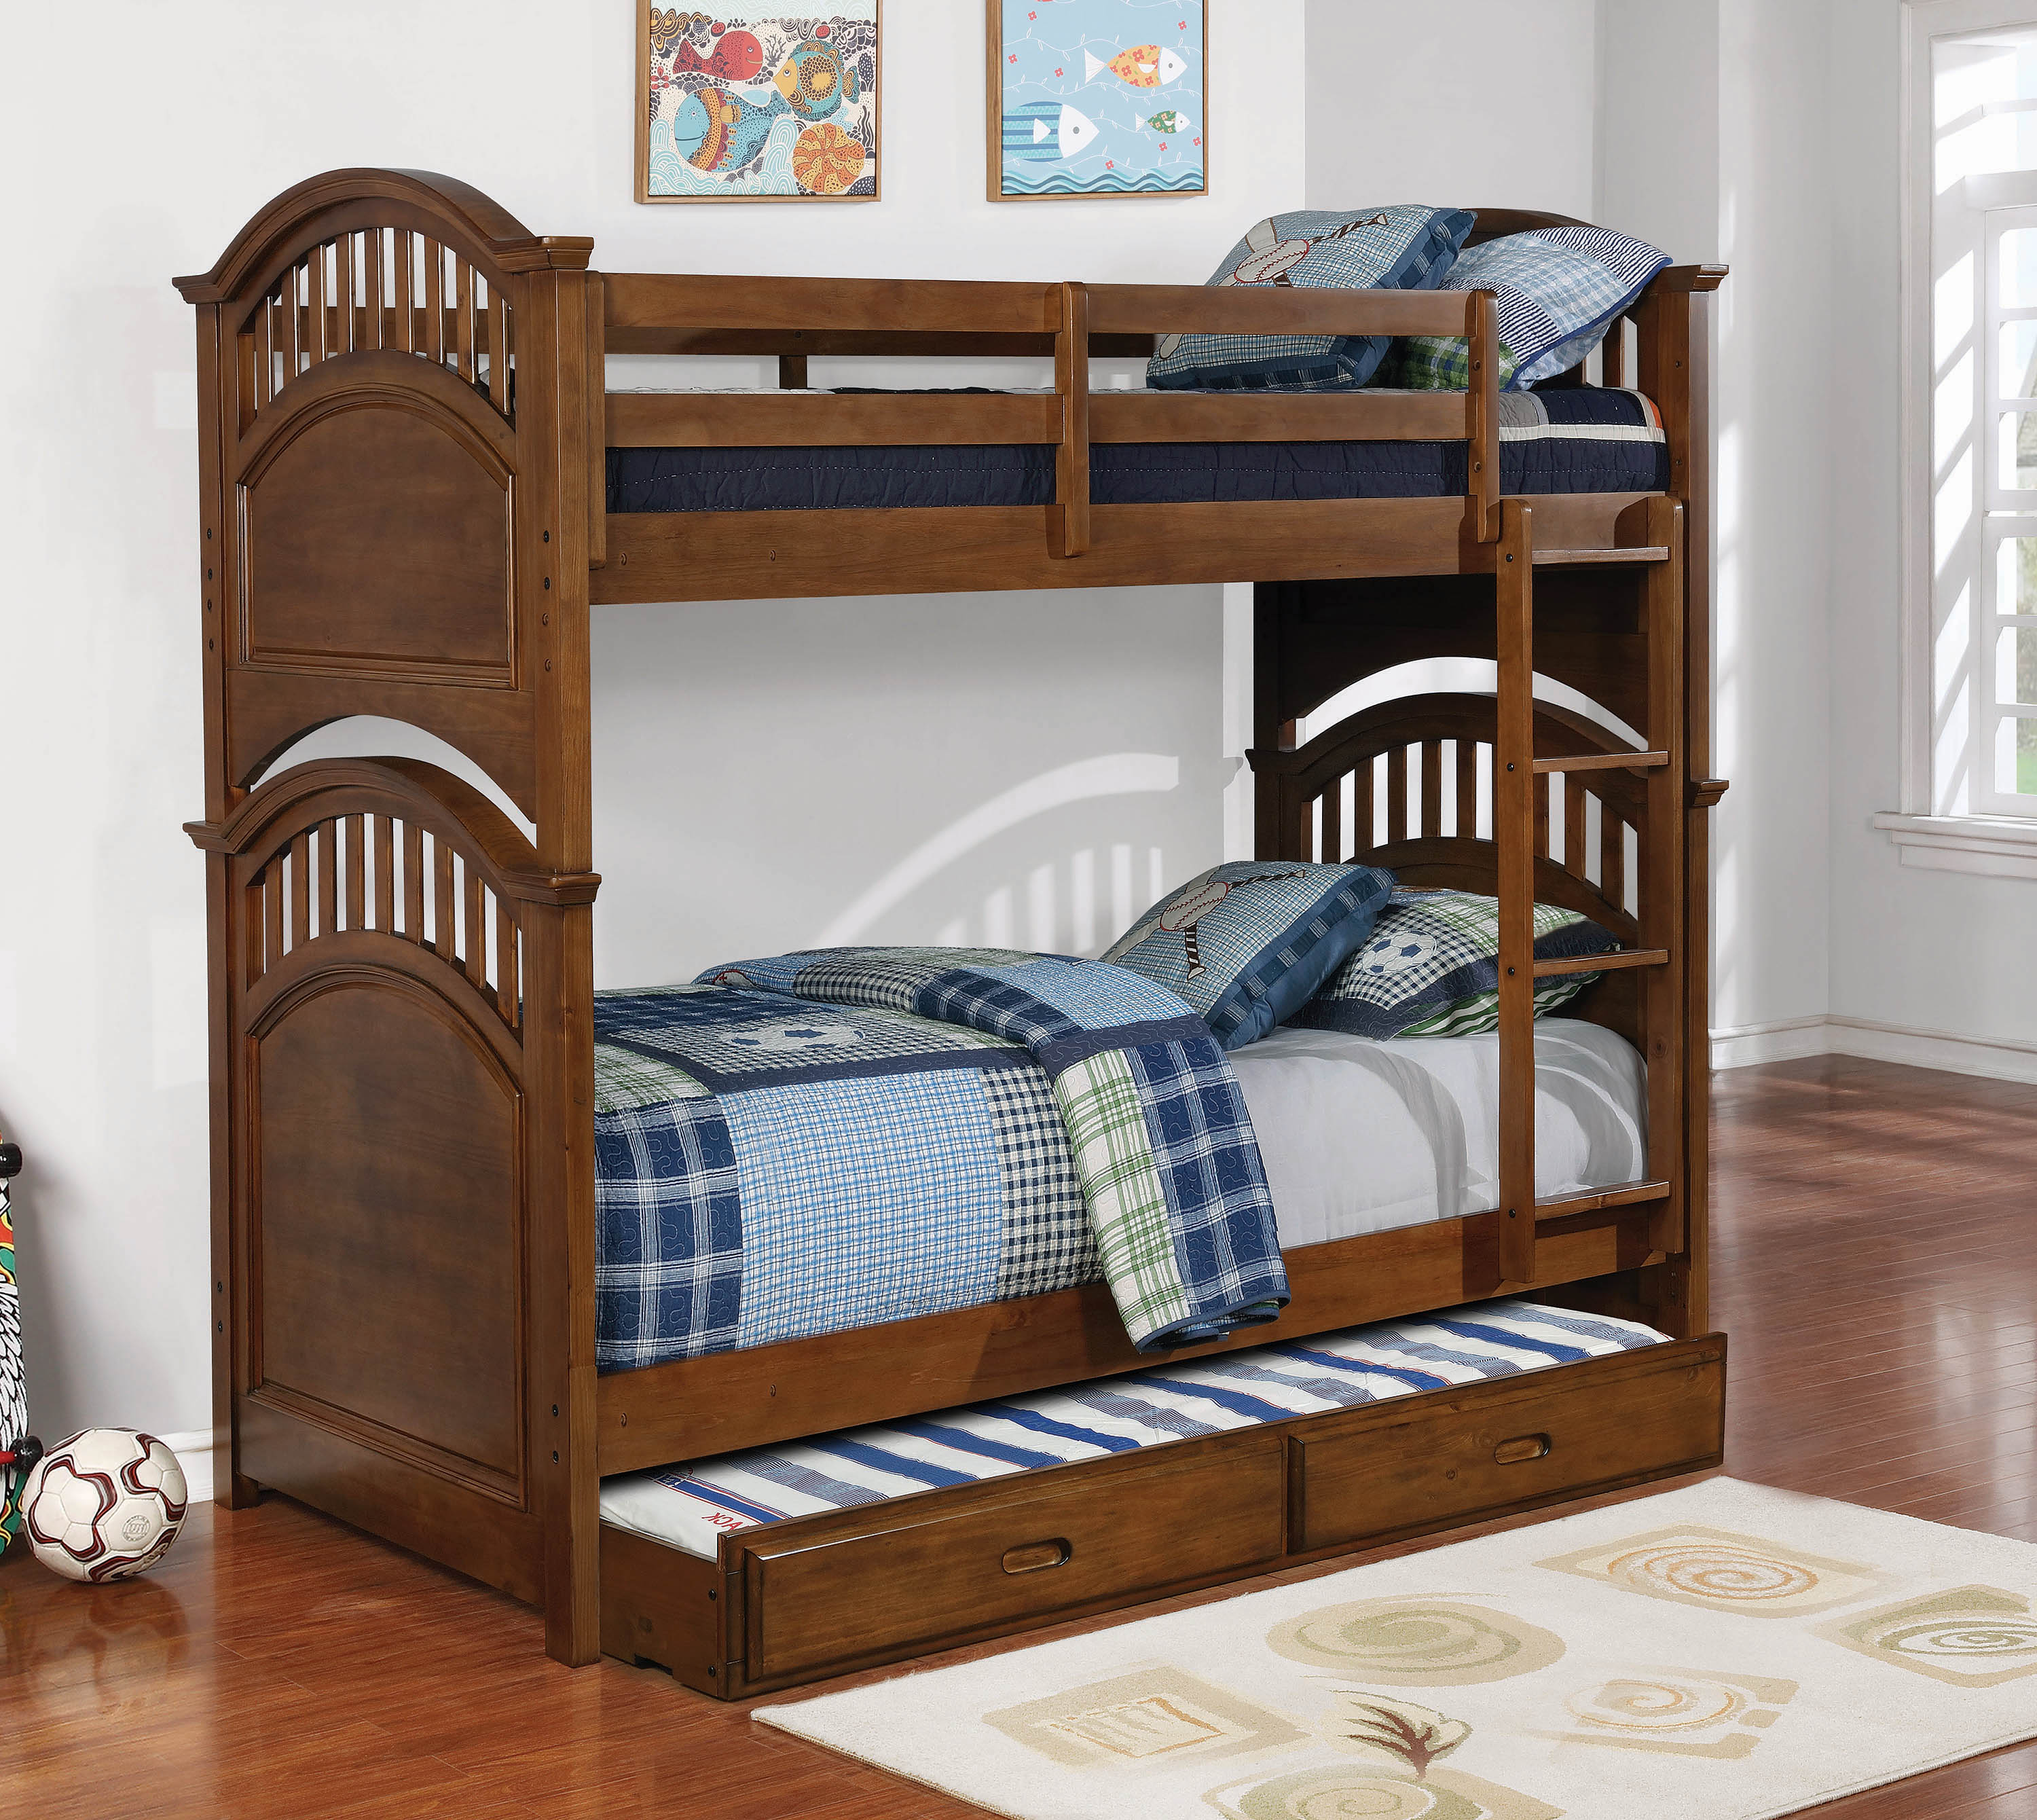 Image result for amish bunk beds michigan